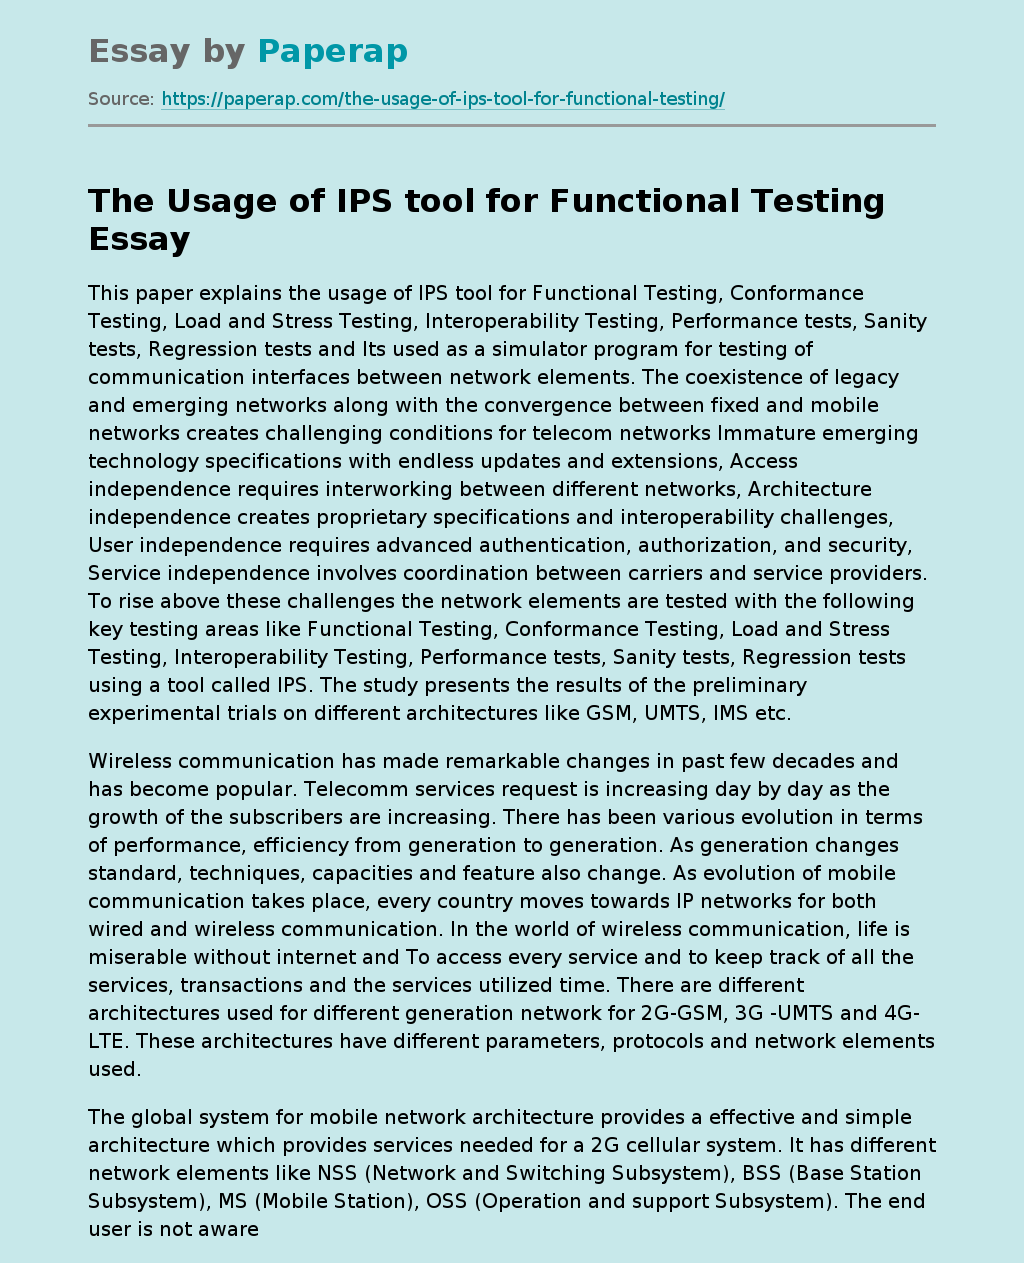 The Usage of IPS tool for Functional Testing